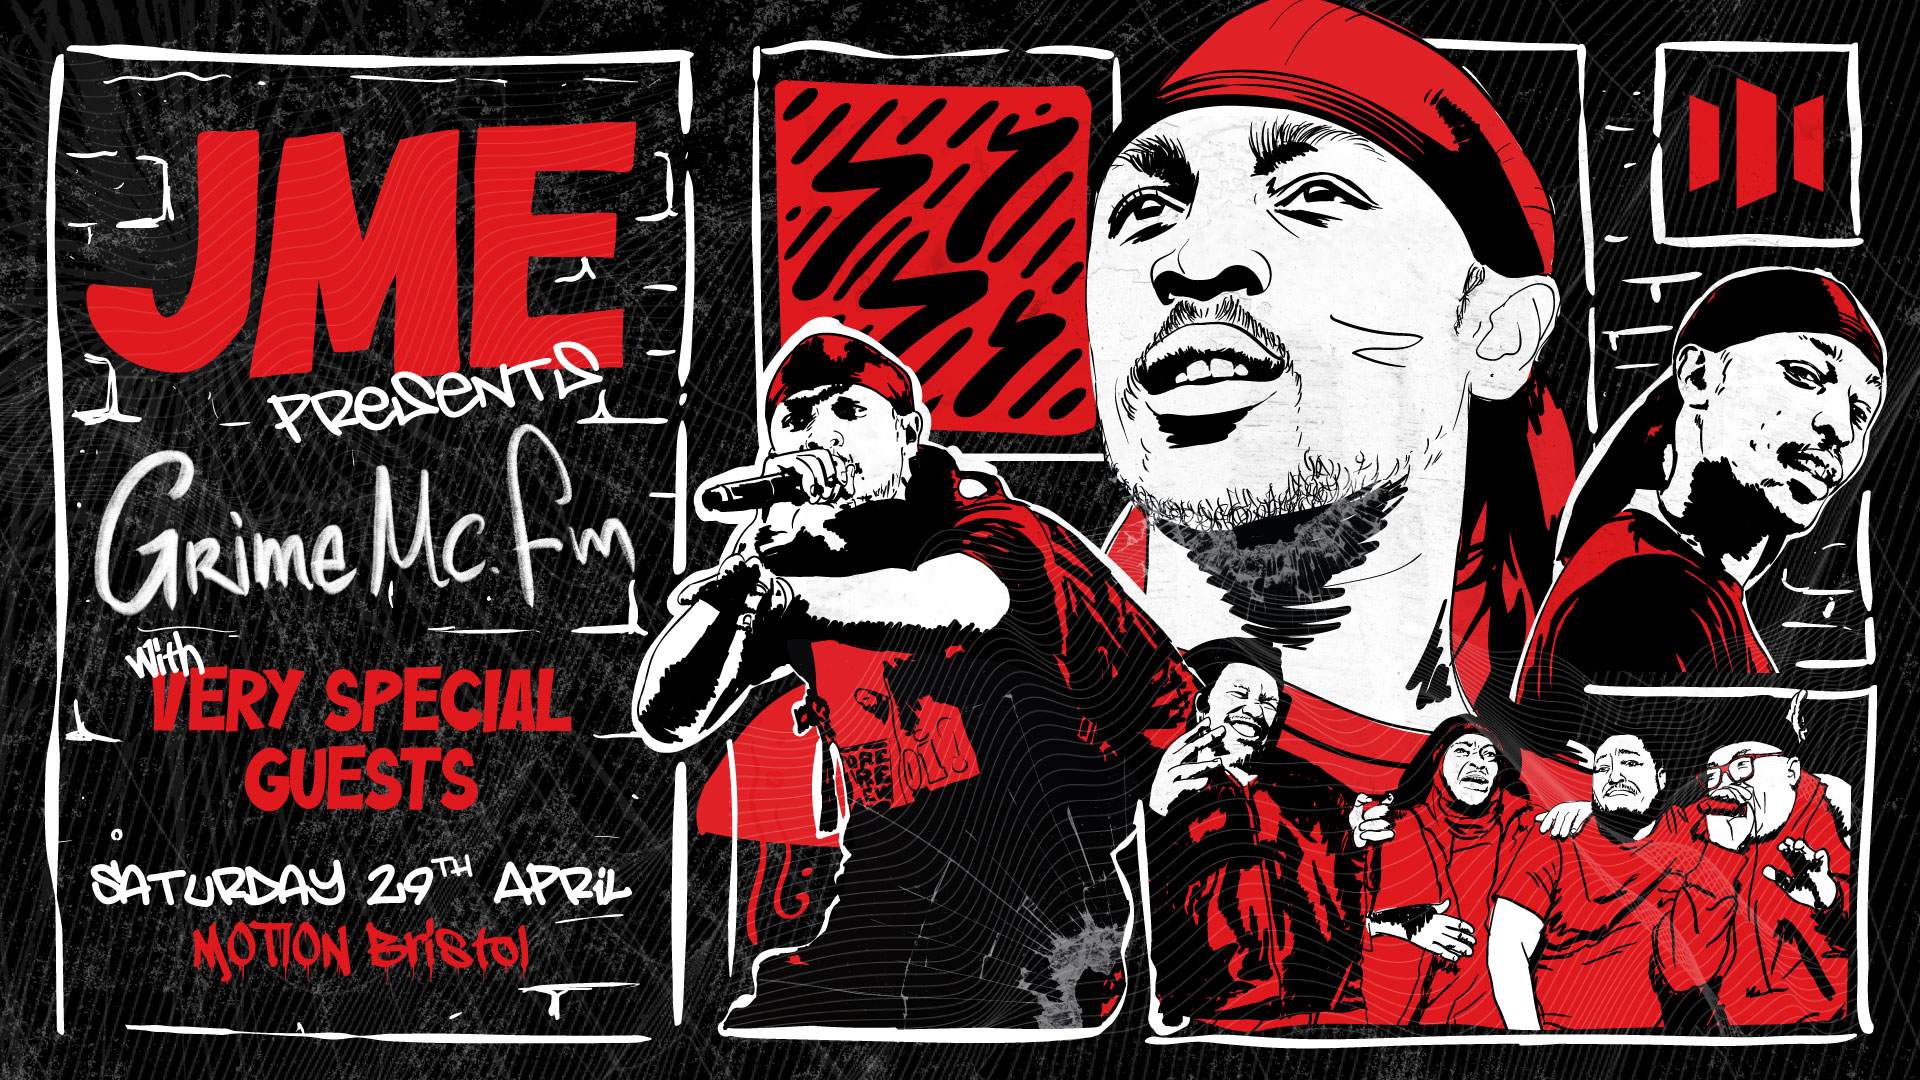 JME presents Grime MC FM with Very Special Guests (SOLD OUT) - Página frontal